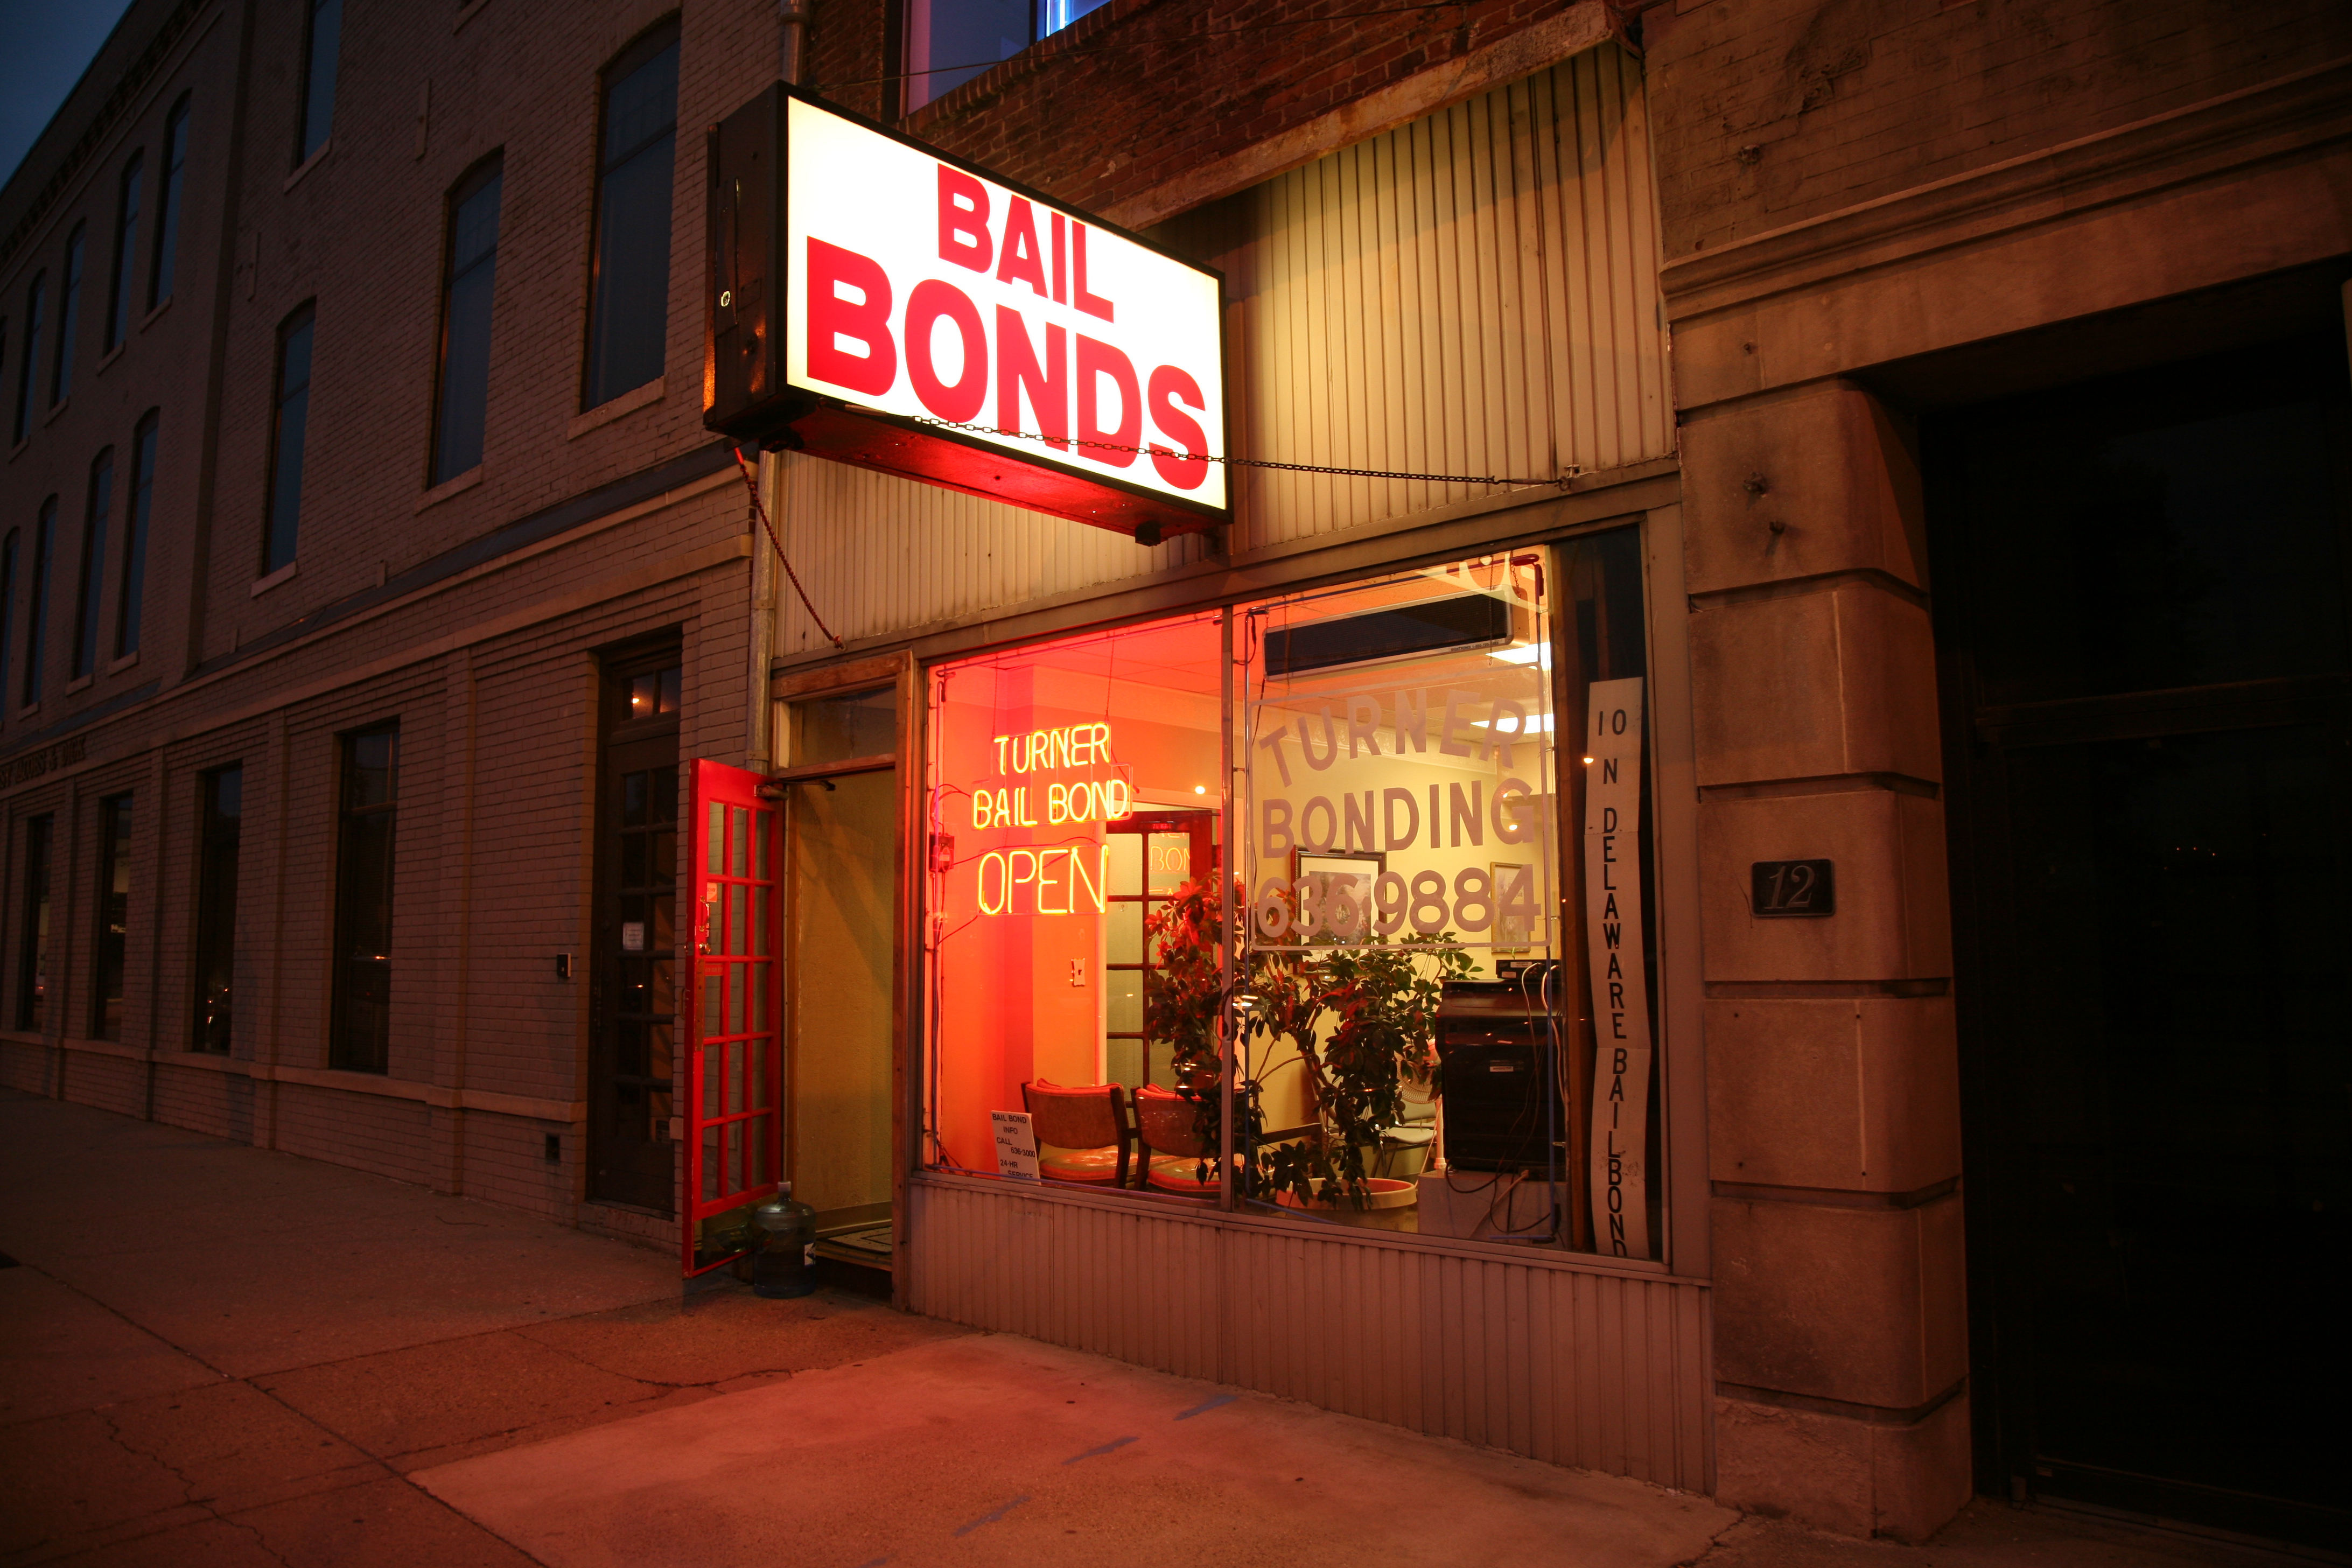 Image of a bail bond agency sign and storefront